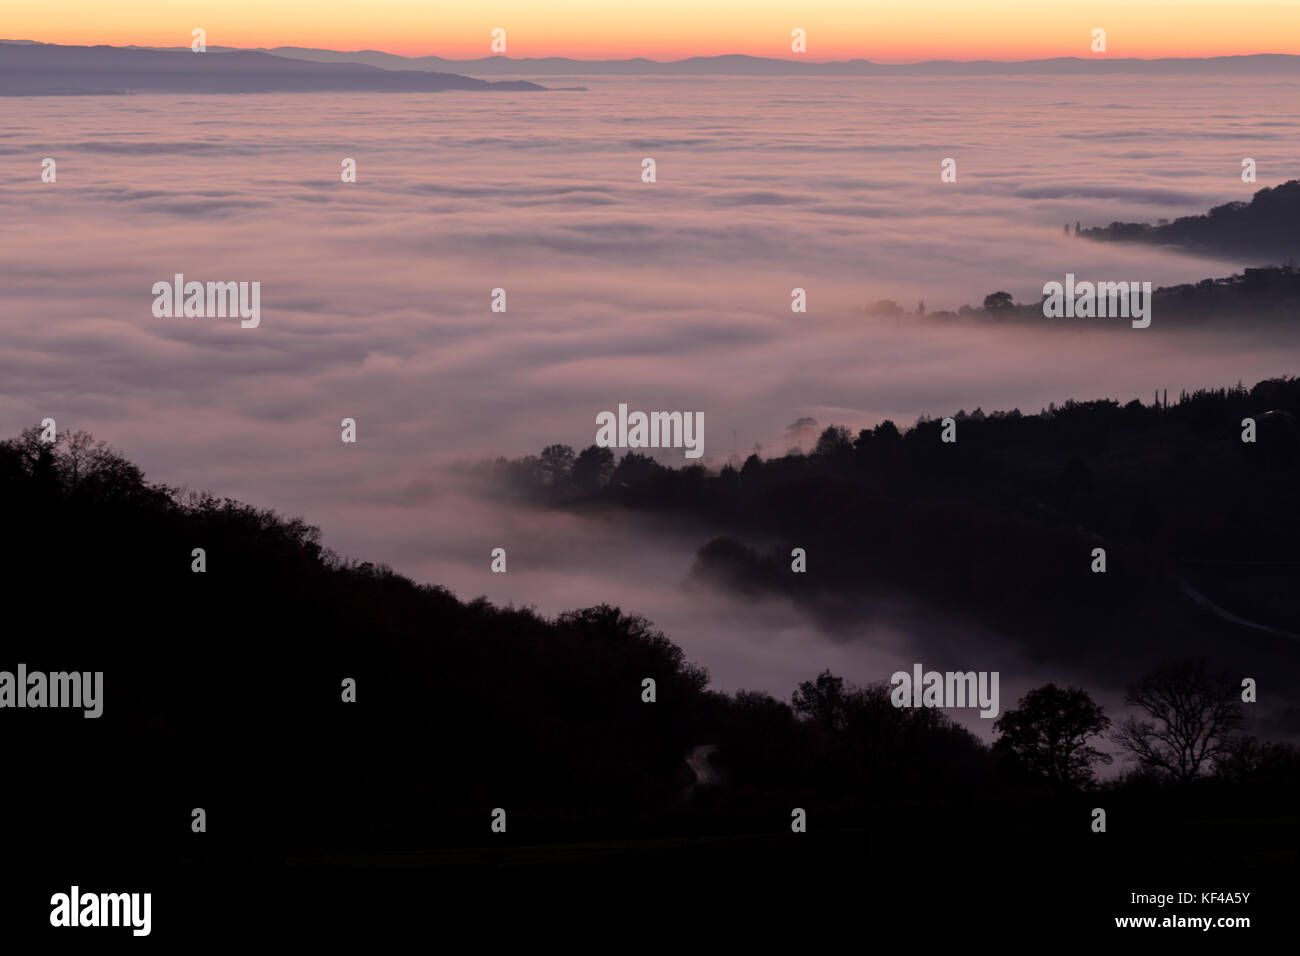 Aerial view of a valley filled by fog at sunset, with beautiful warm colors of the sky reflecting on the mist Stock Photo